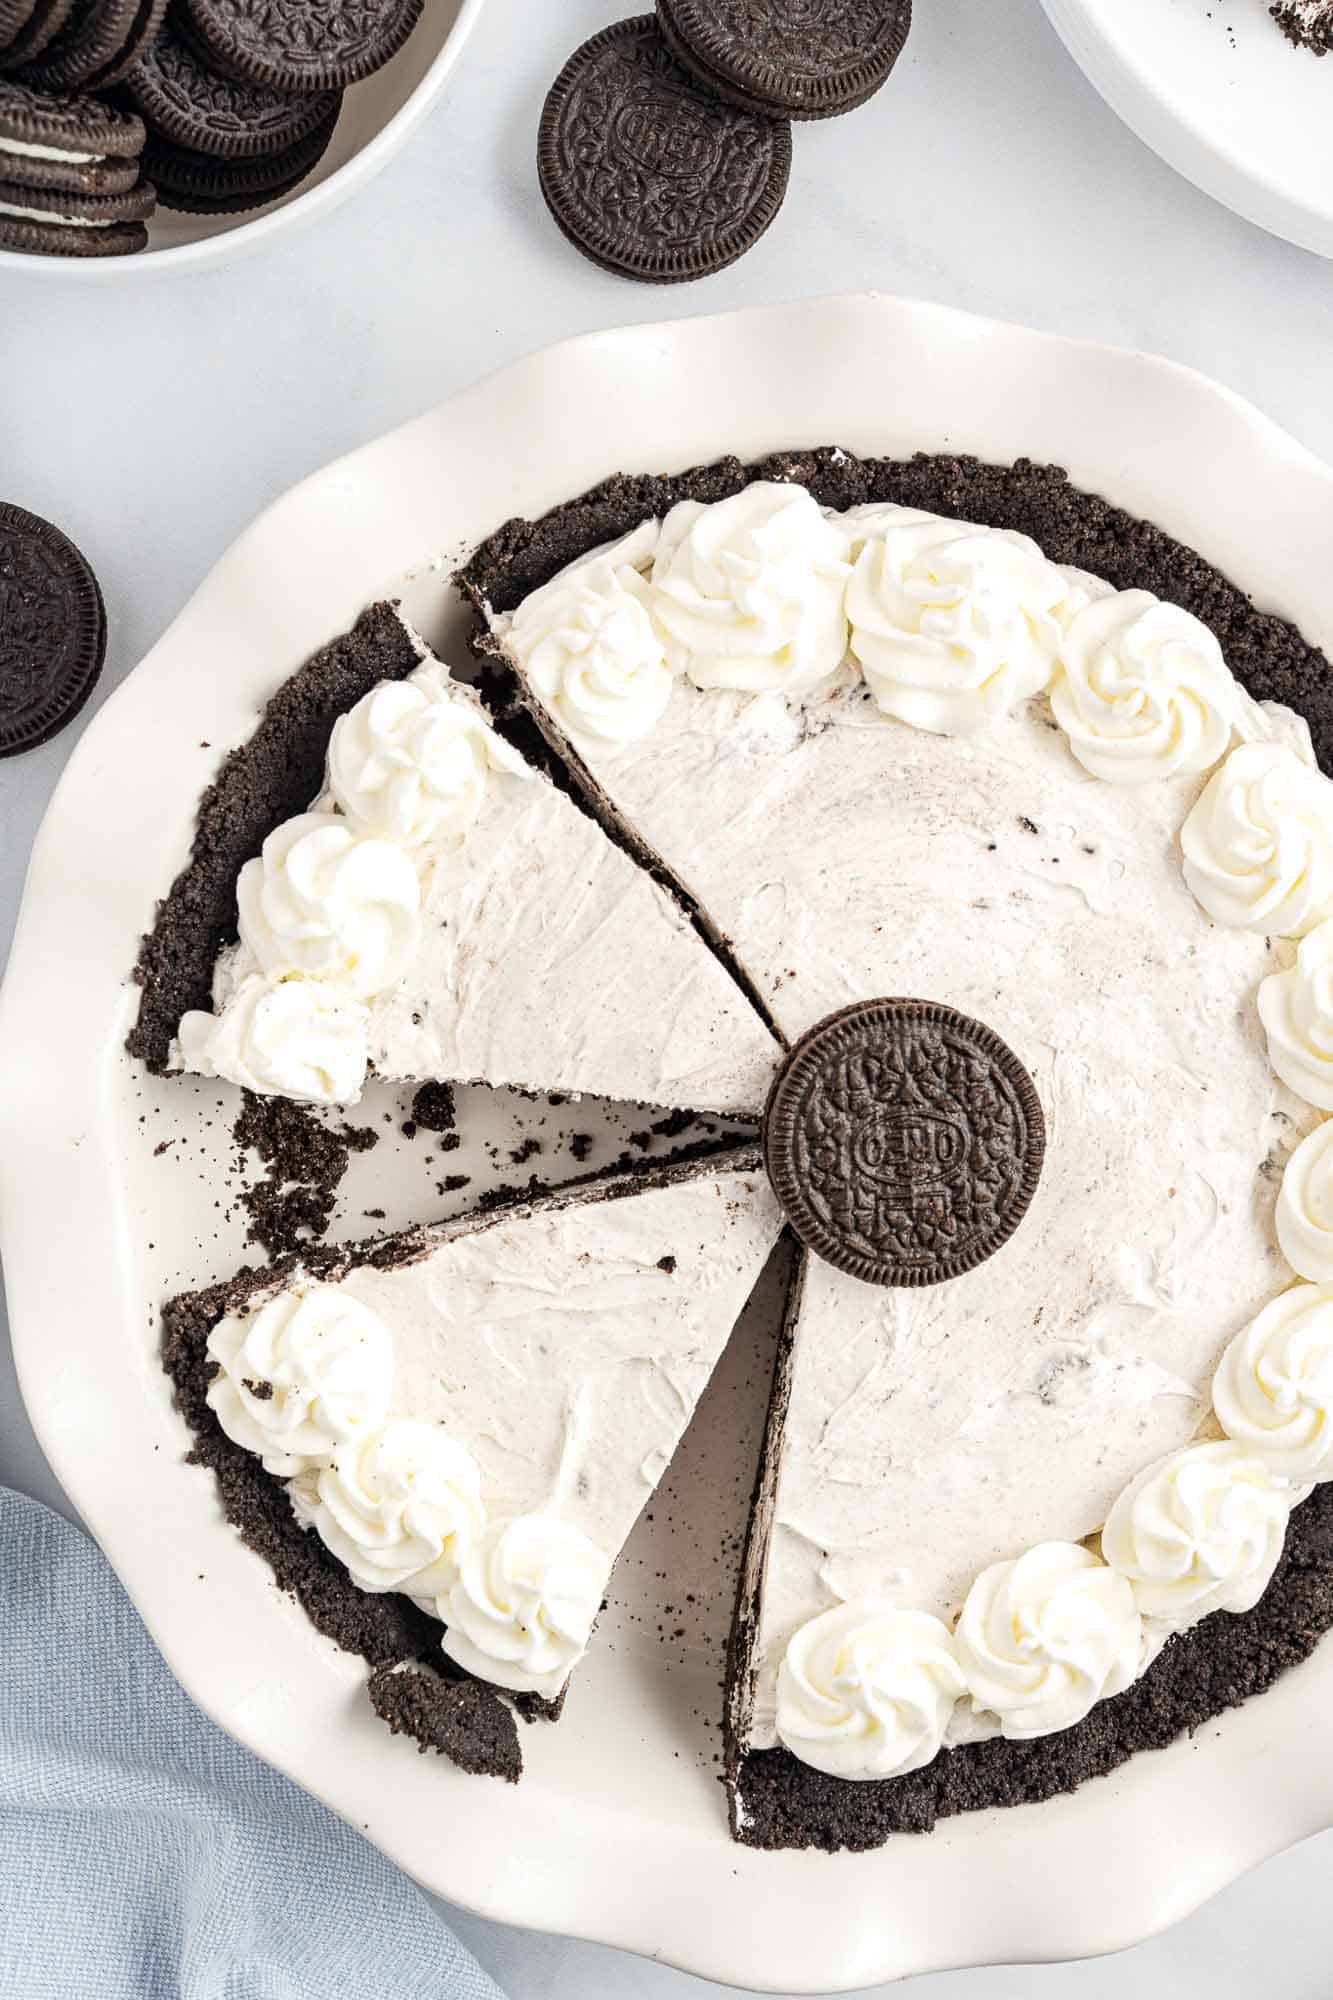 an oreo pie that's been sliced. One slice is missing from the left side. Viewed from above